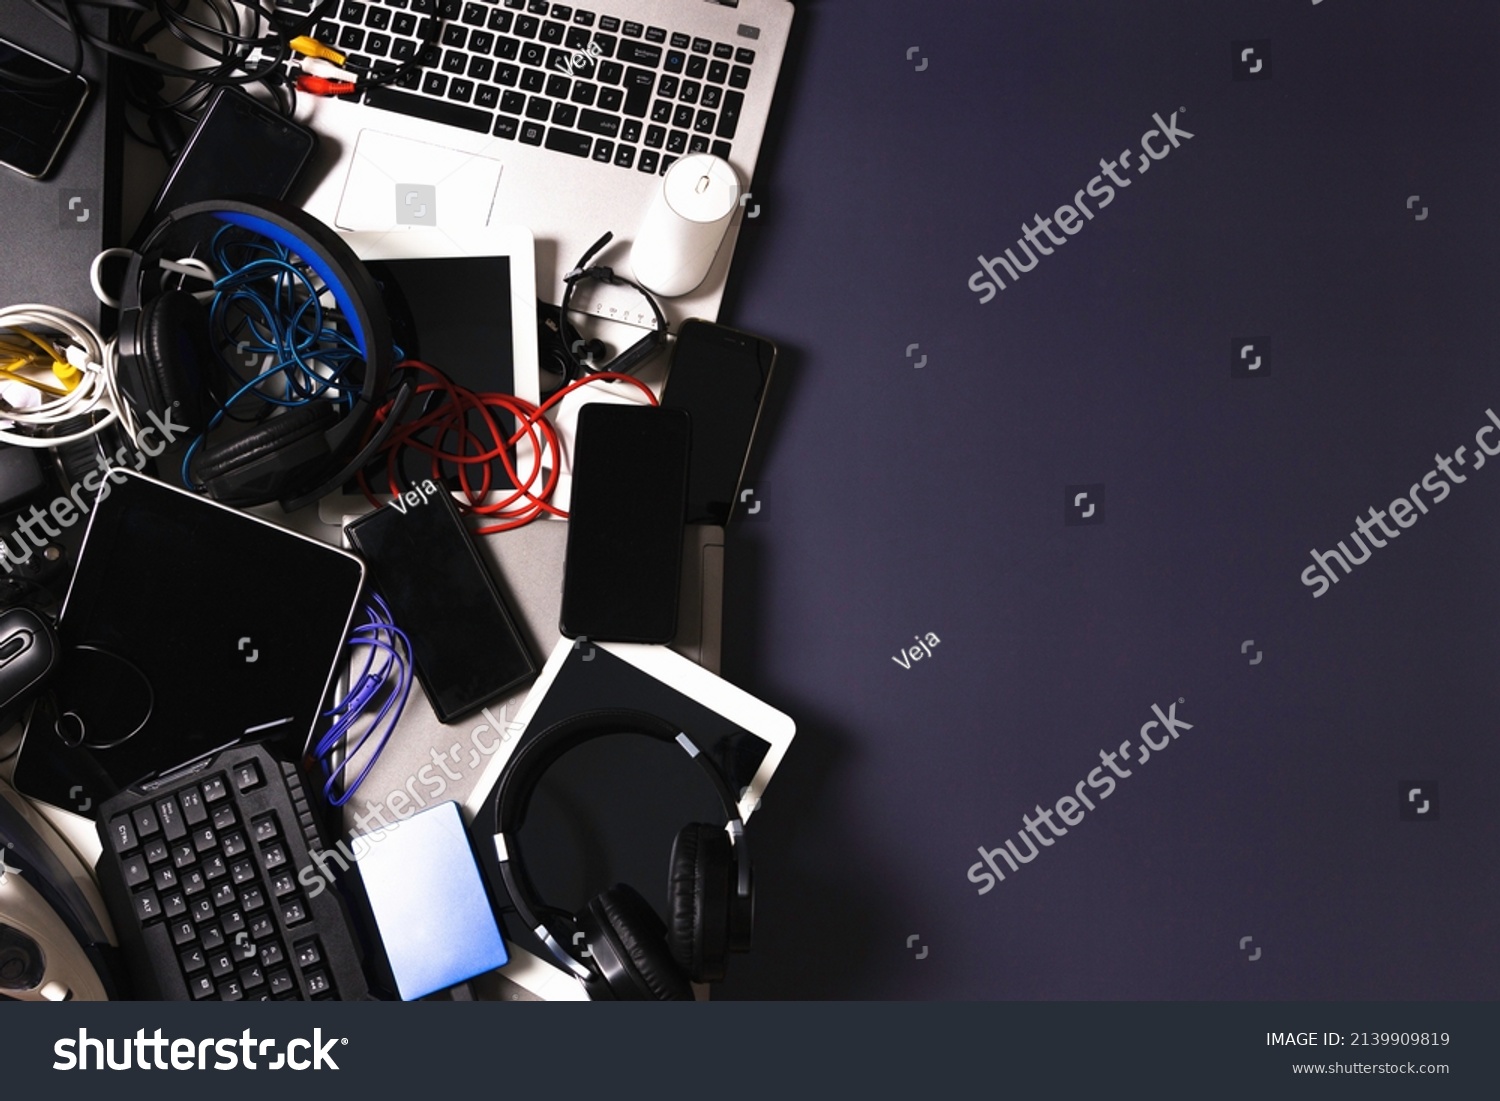 Old computers, digital tablets, mobile phones, many used electronic gadgets devices, broken household and appliances on gray background. Planned obsolescence, electronic waste for recycling concept #2139909819